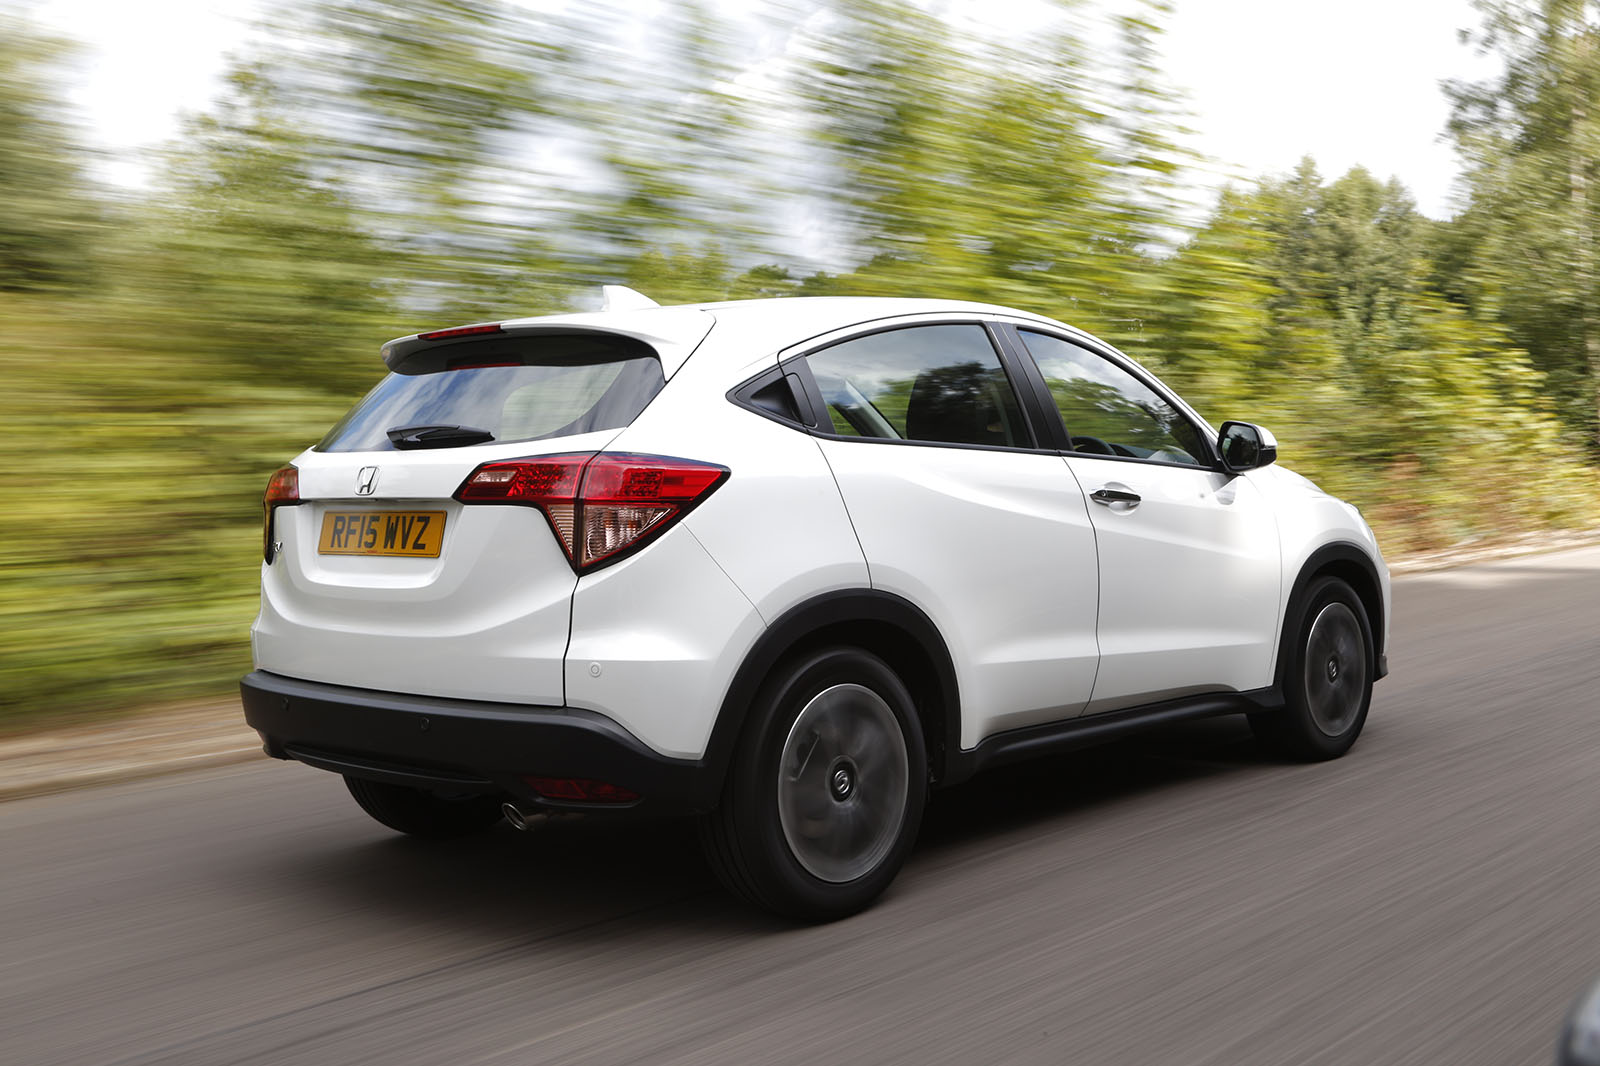 The Honda HR-V has a robust aptitude common to the Jazz and the CR-V, underwitten wiith a splash of sprightliness